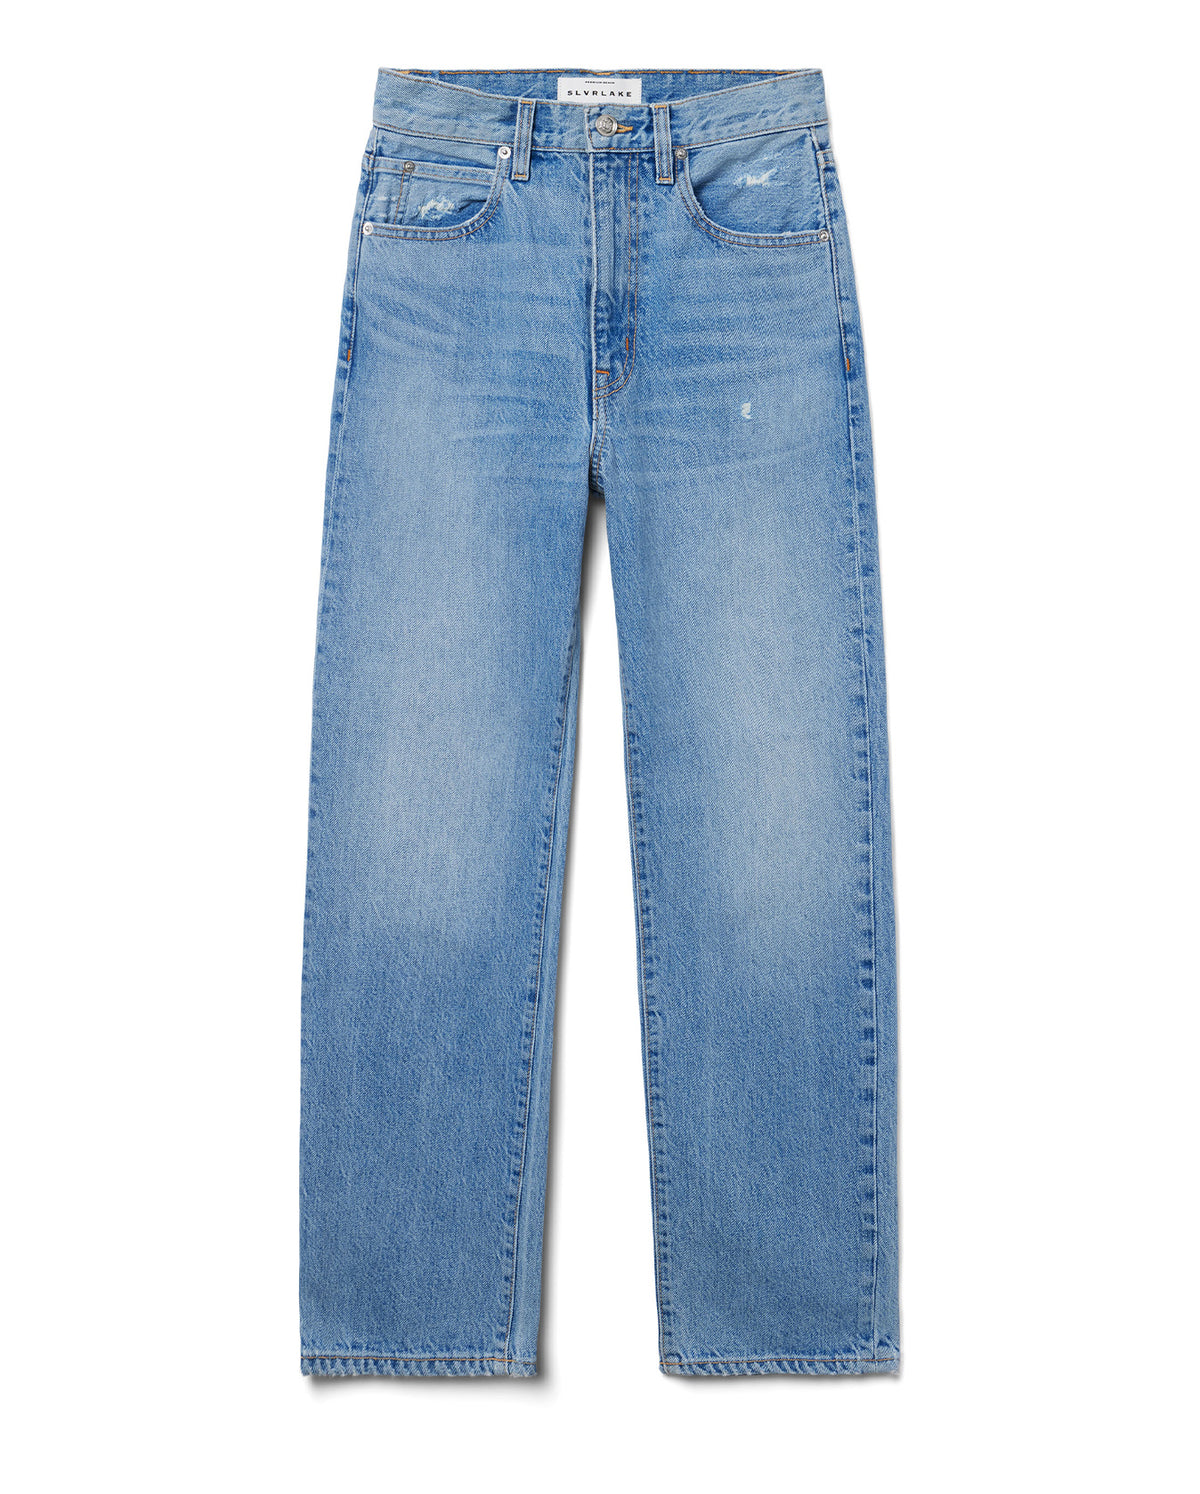 London Straight Leg Ankle Jeans  - Silver Springs